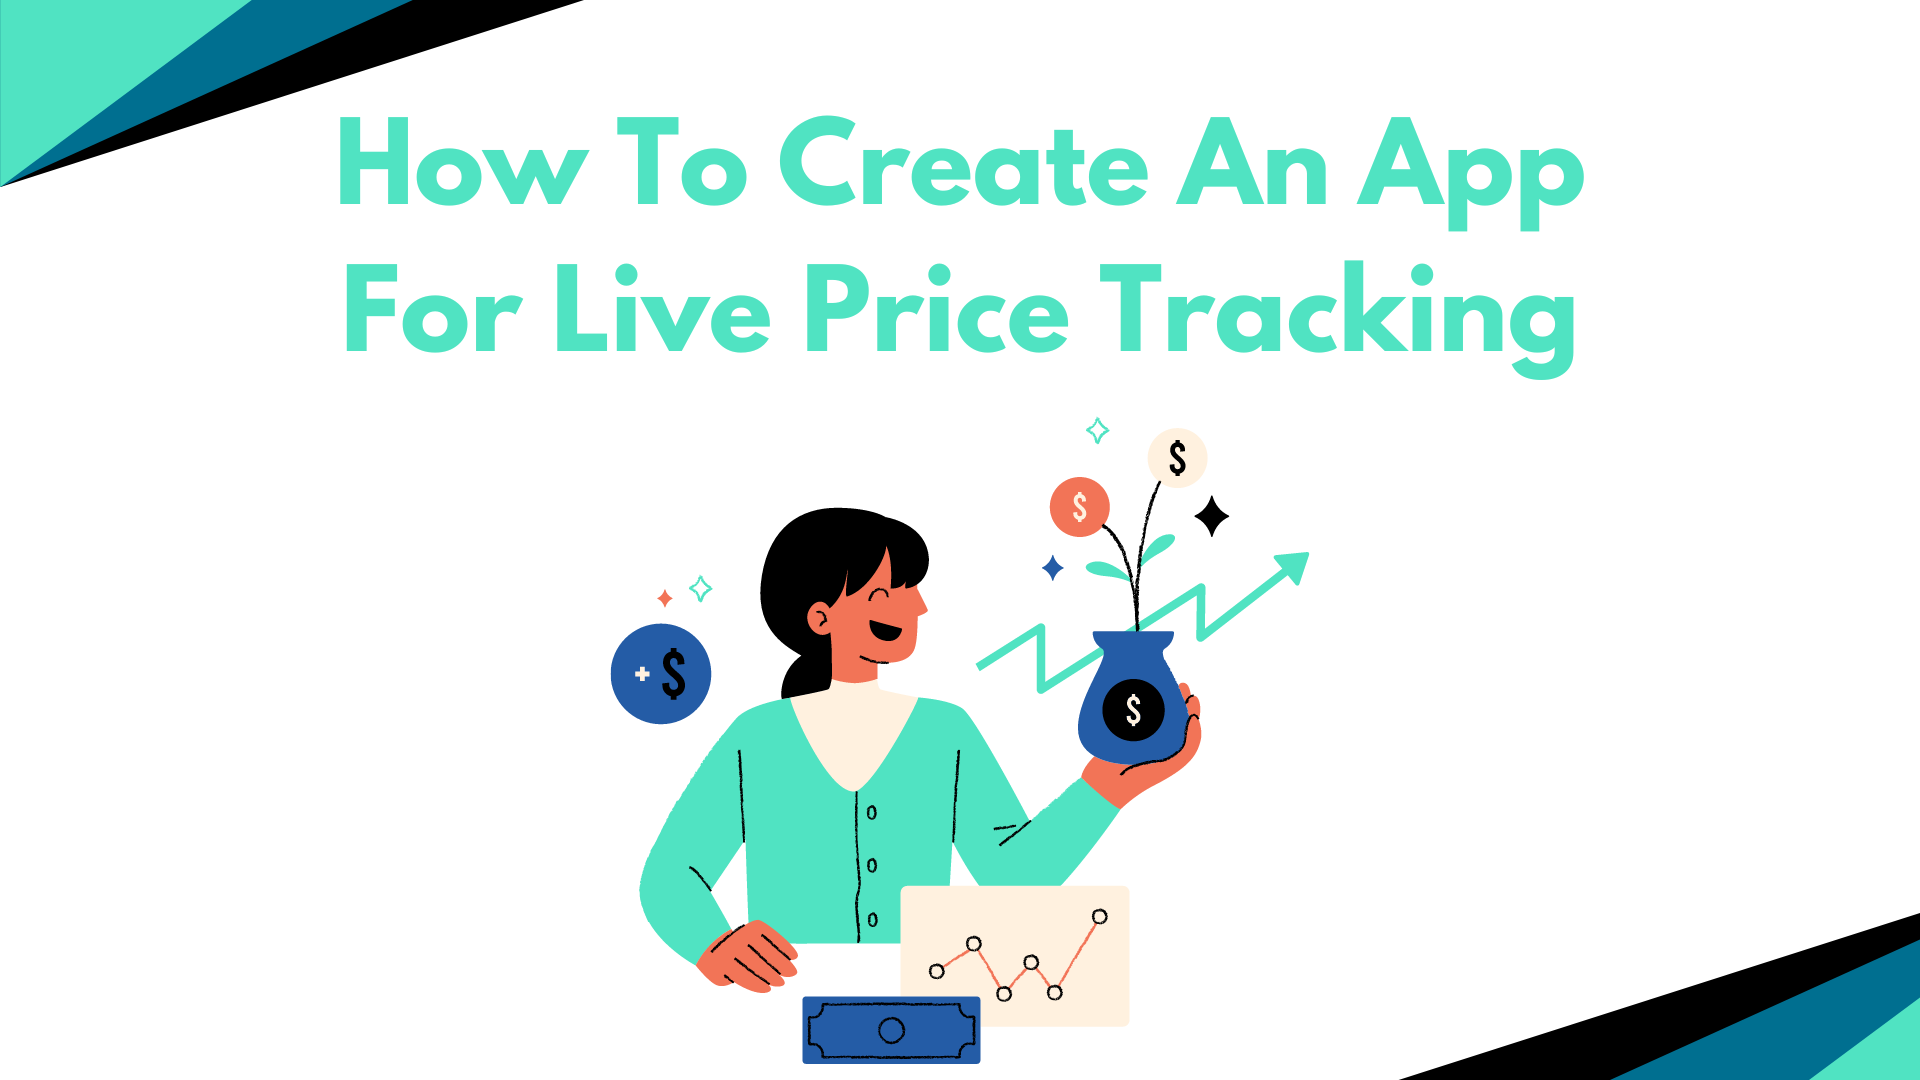 Create An App For Live Price Tracking